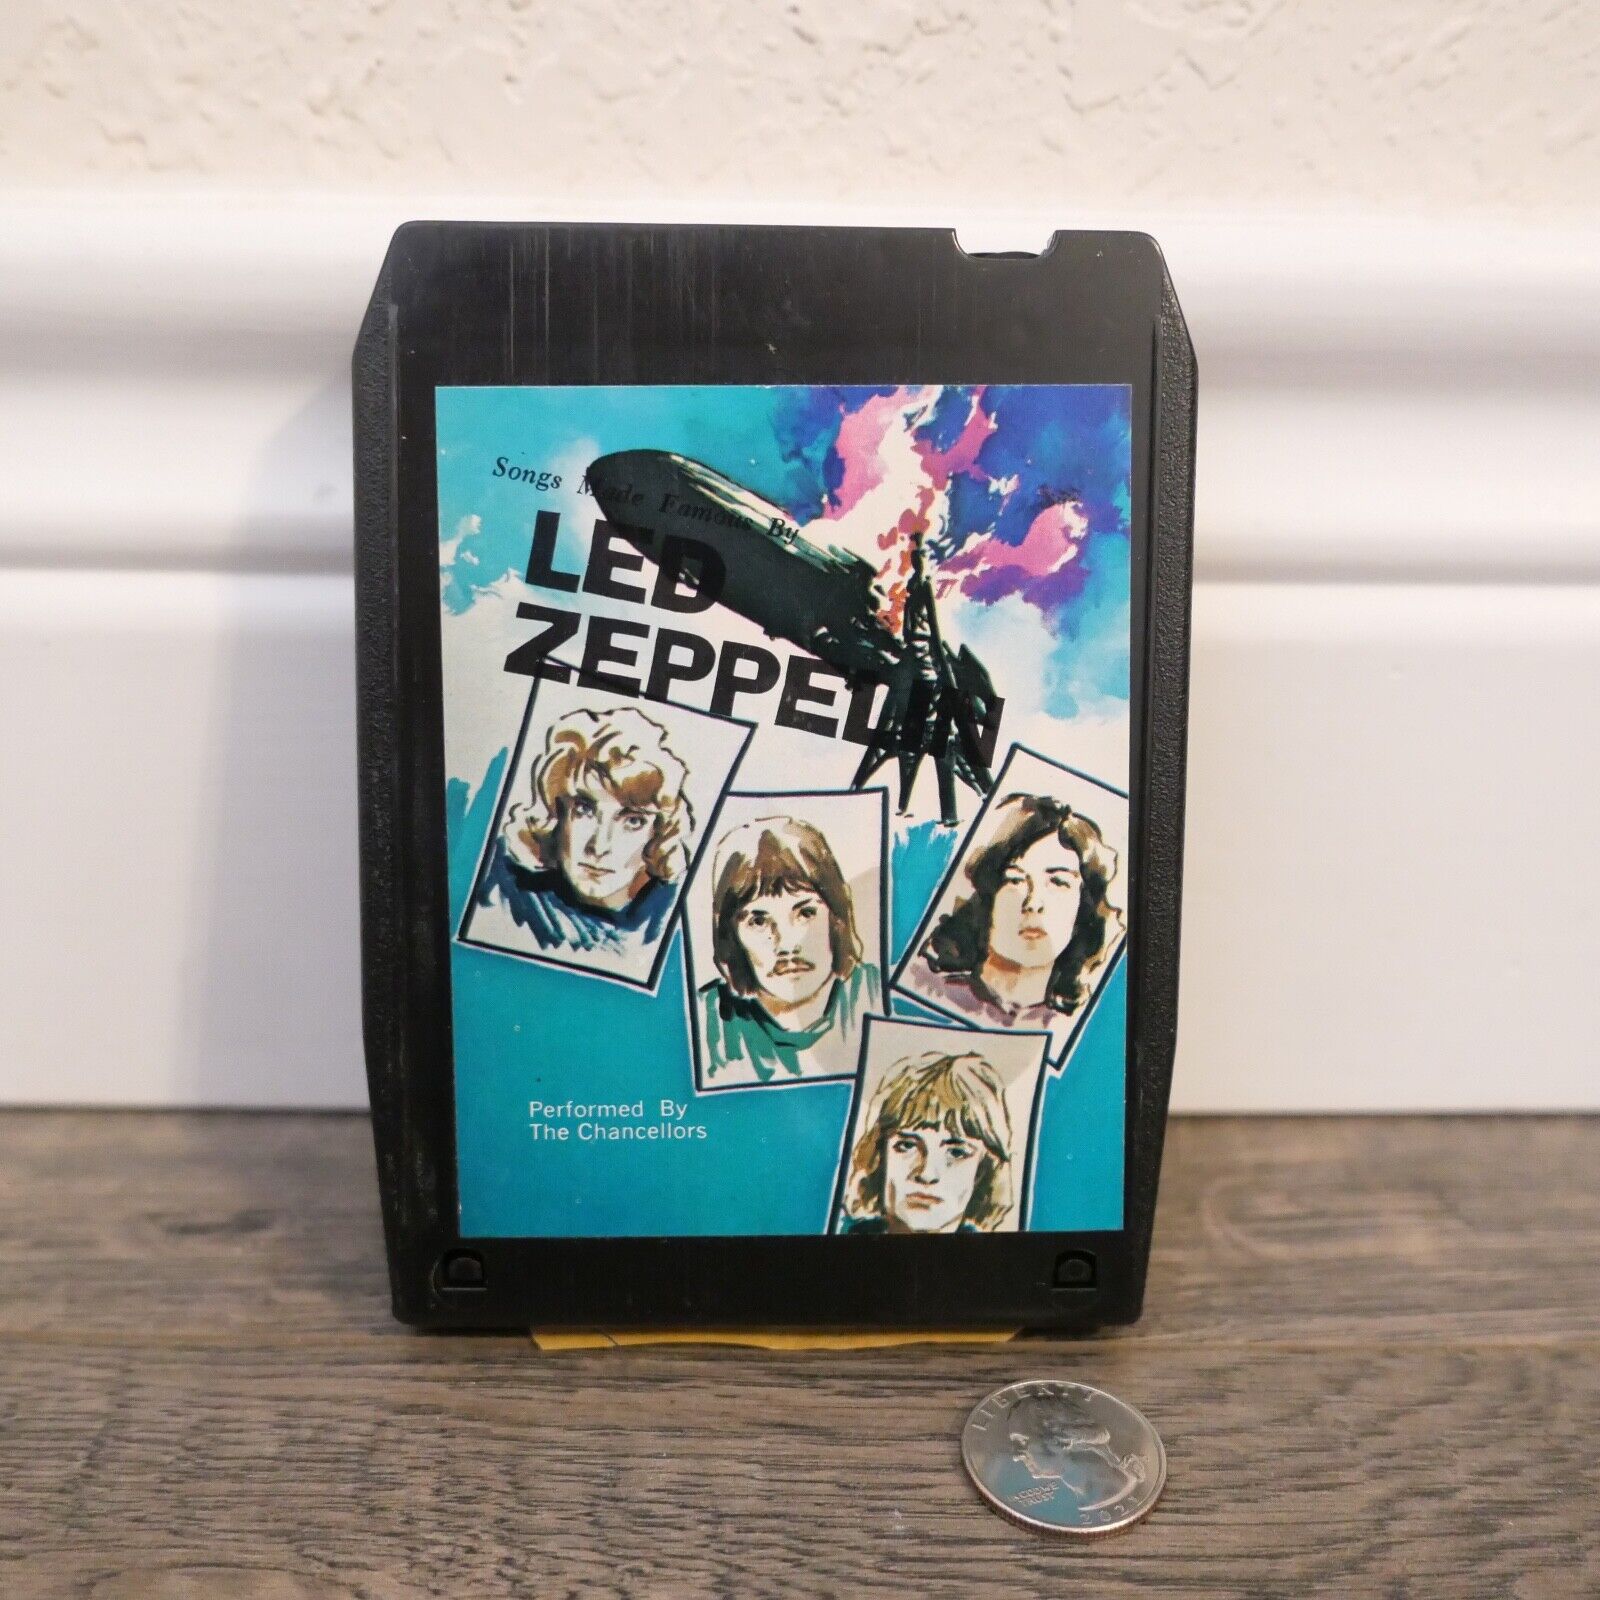 Songs Made Famous By Led Zeppelin Performed By The Chancellors 8 track tape !!!